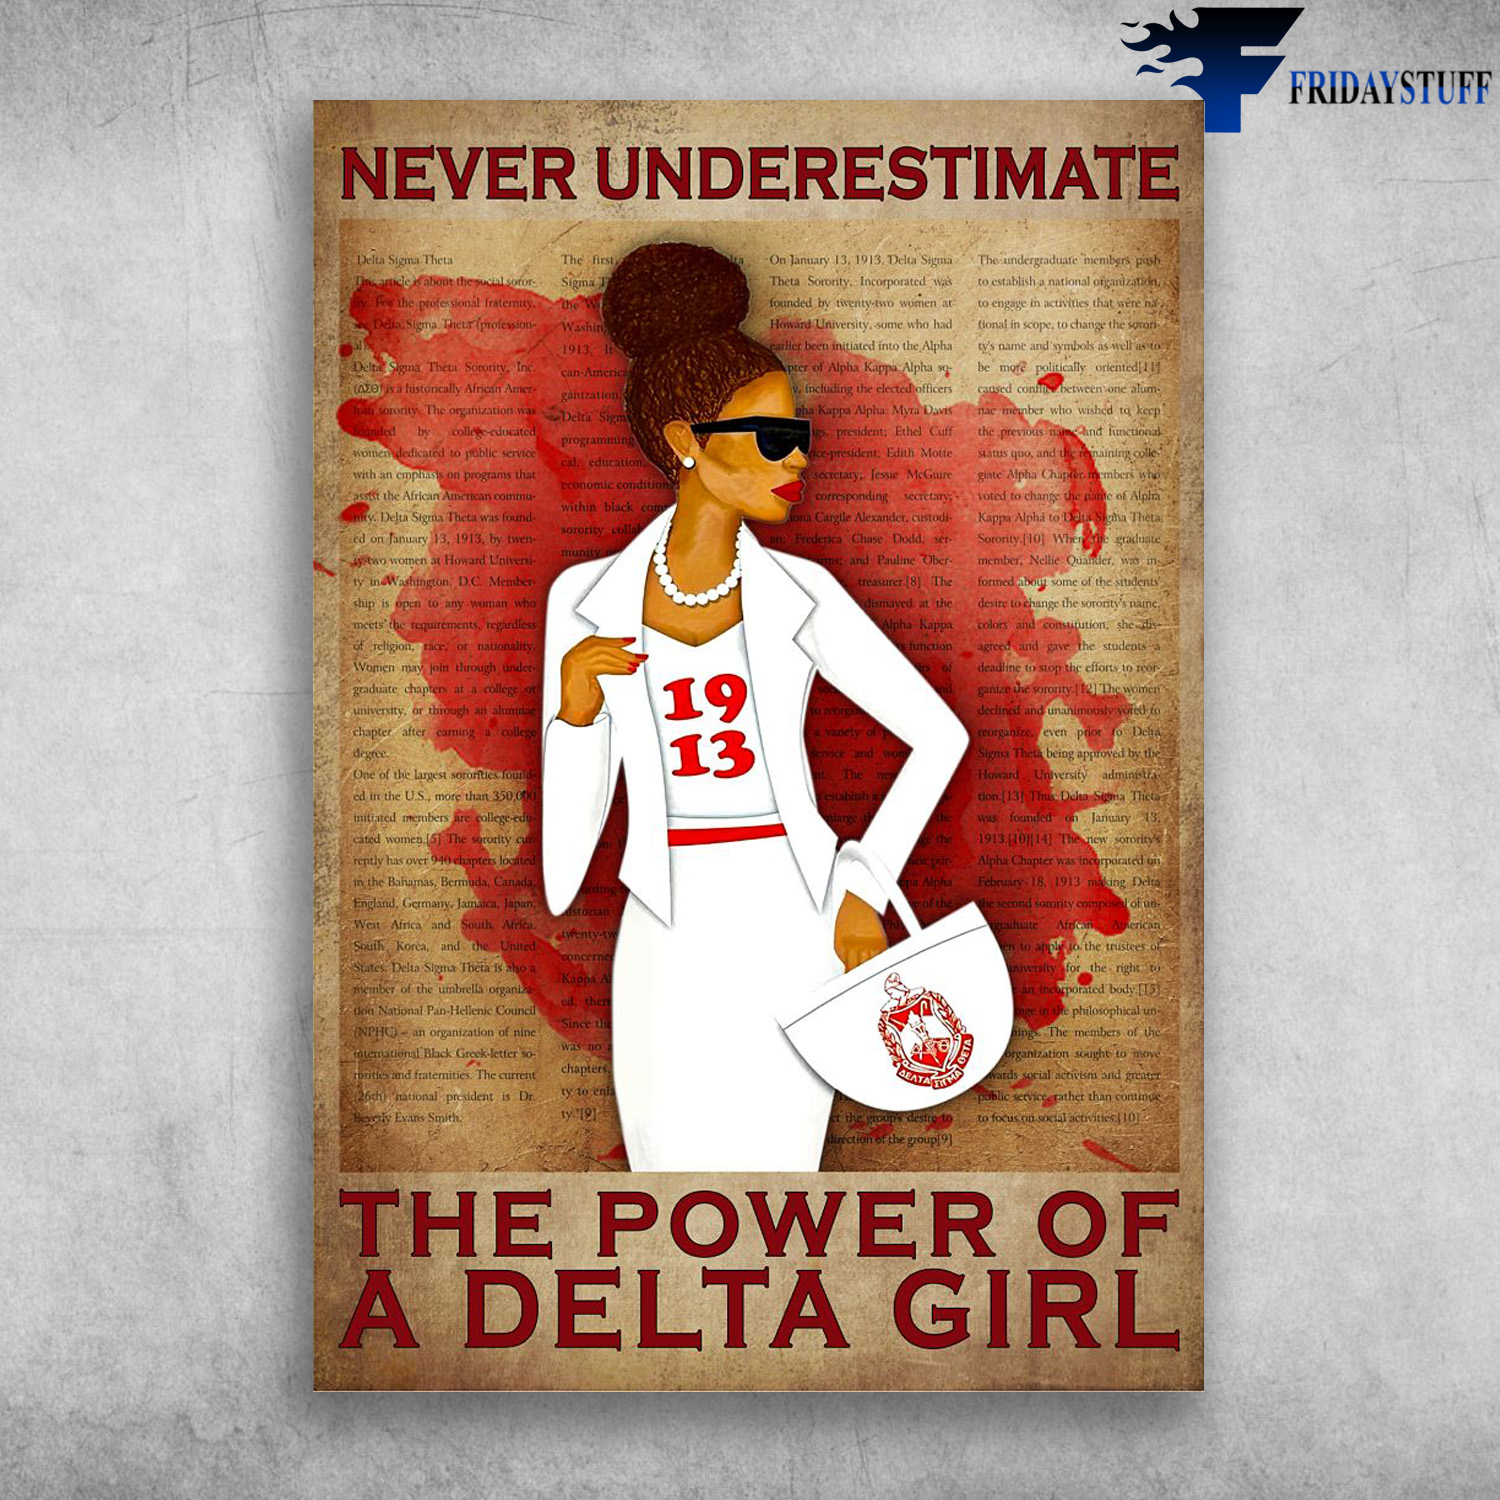 Old Black Girl - Never Underestimate, The Power Of A Delta Girl